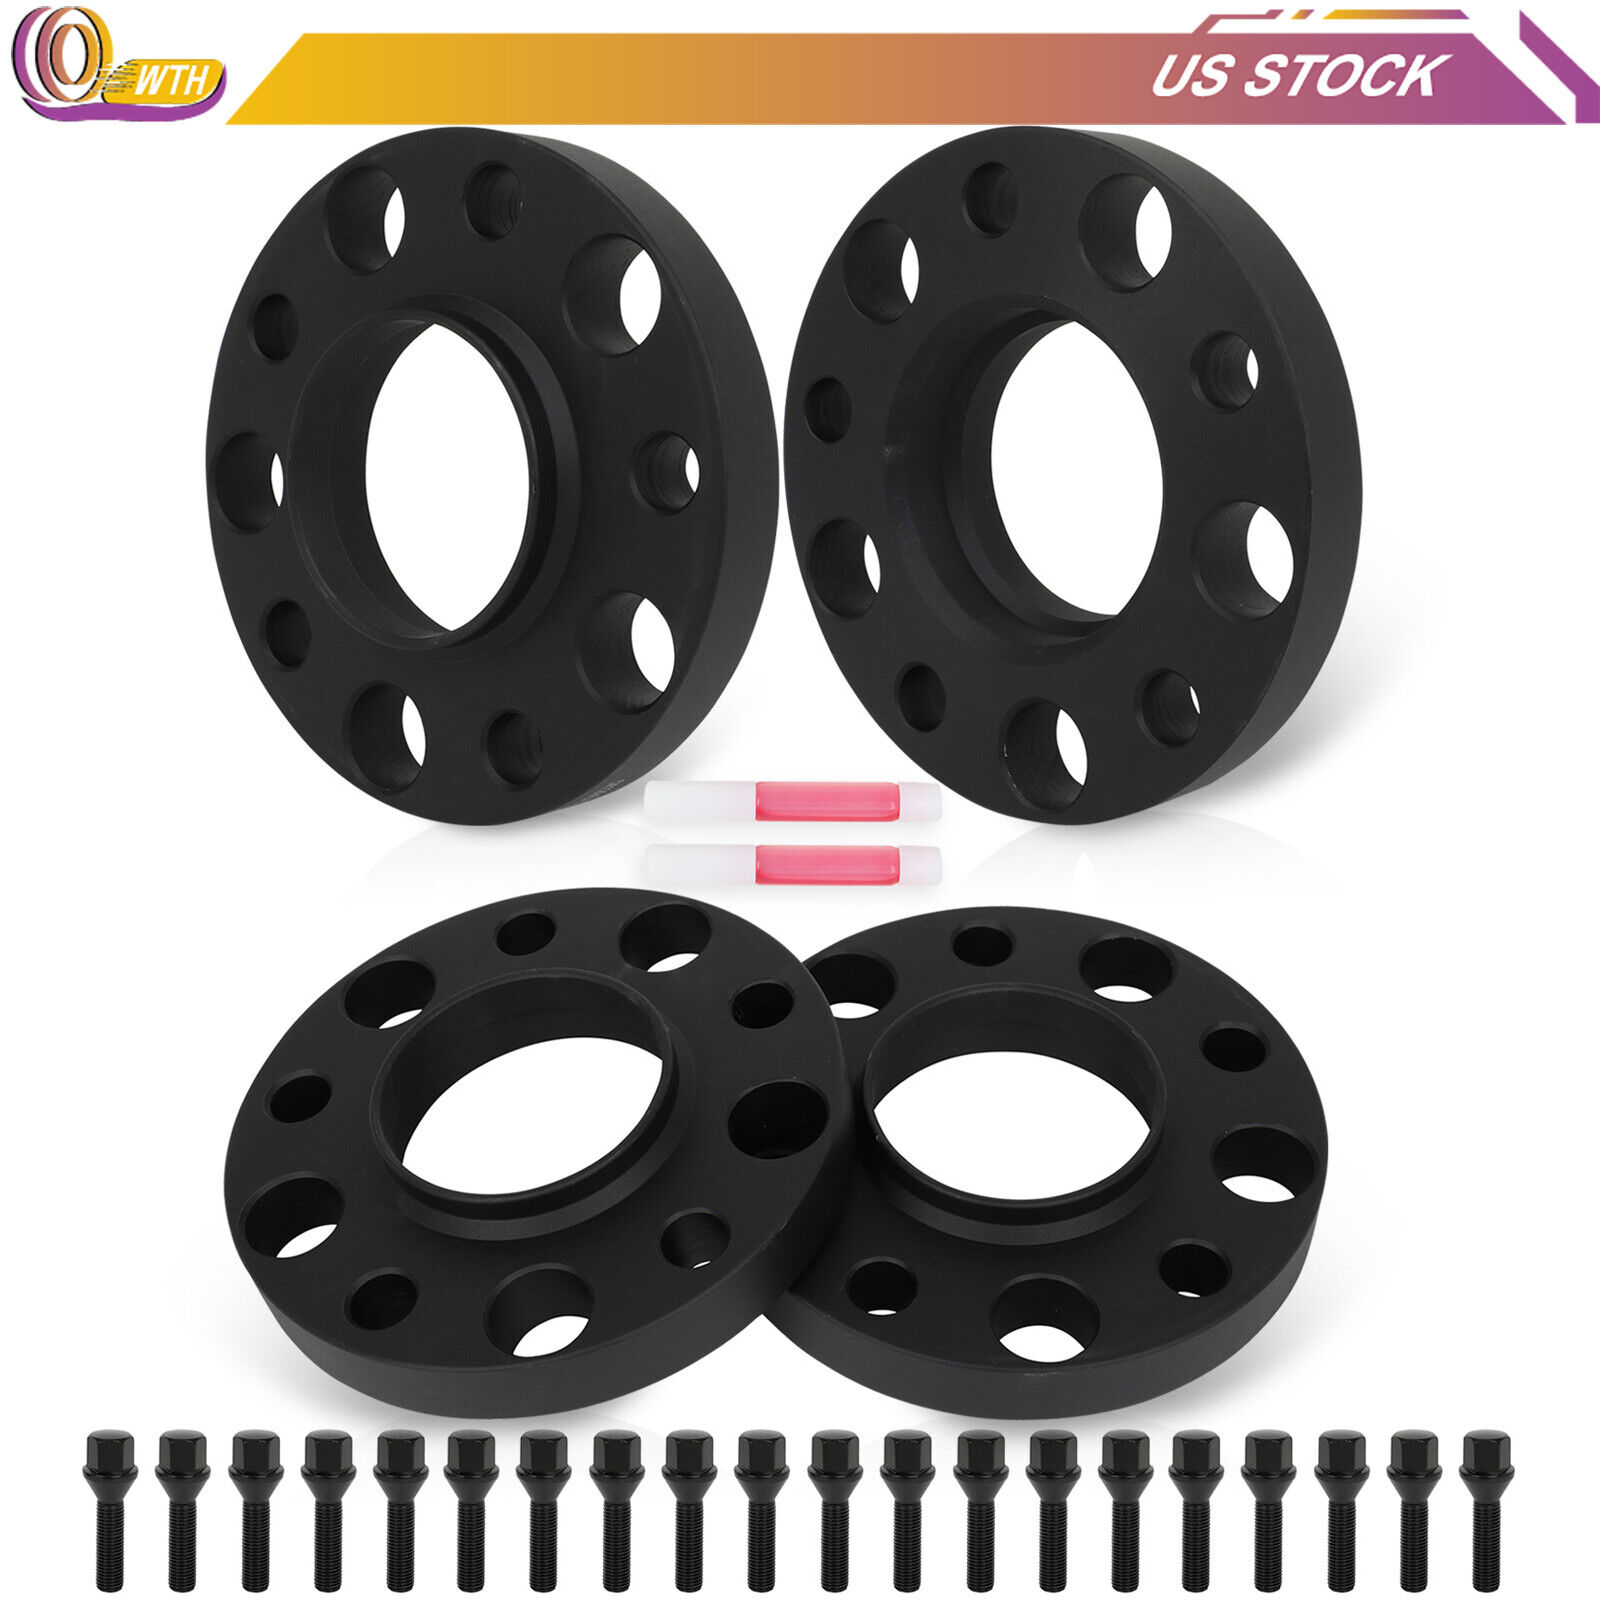 4pcs 20mm Hubcentric Wheel Spacers 5x120 Fits 318ti 325i 325is 328i 328is M3 E36